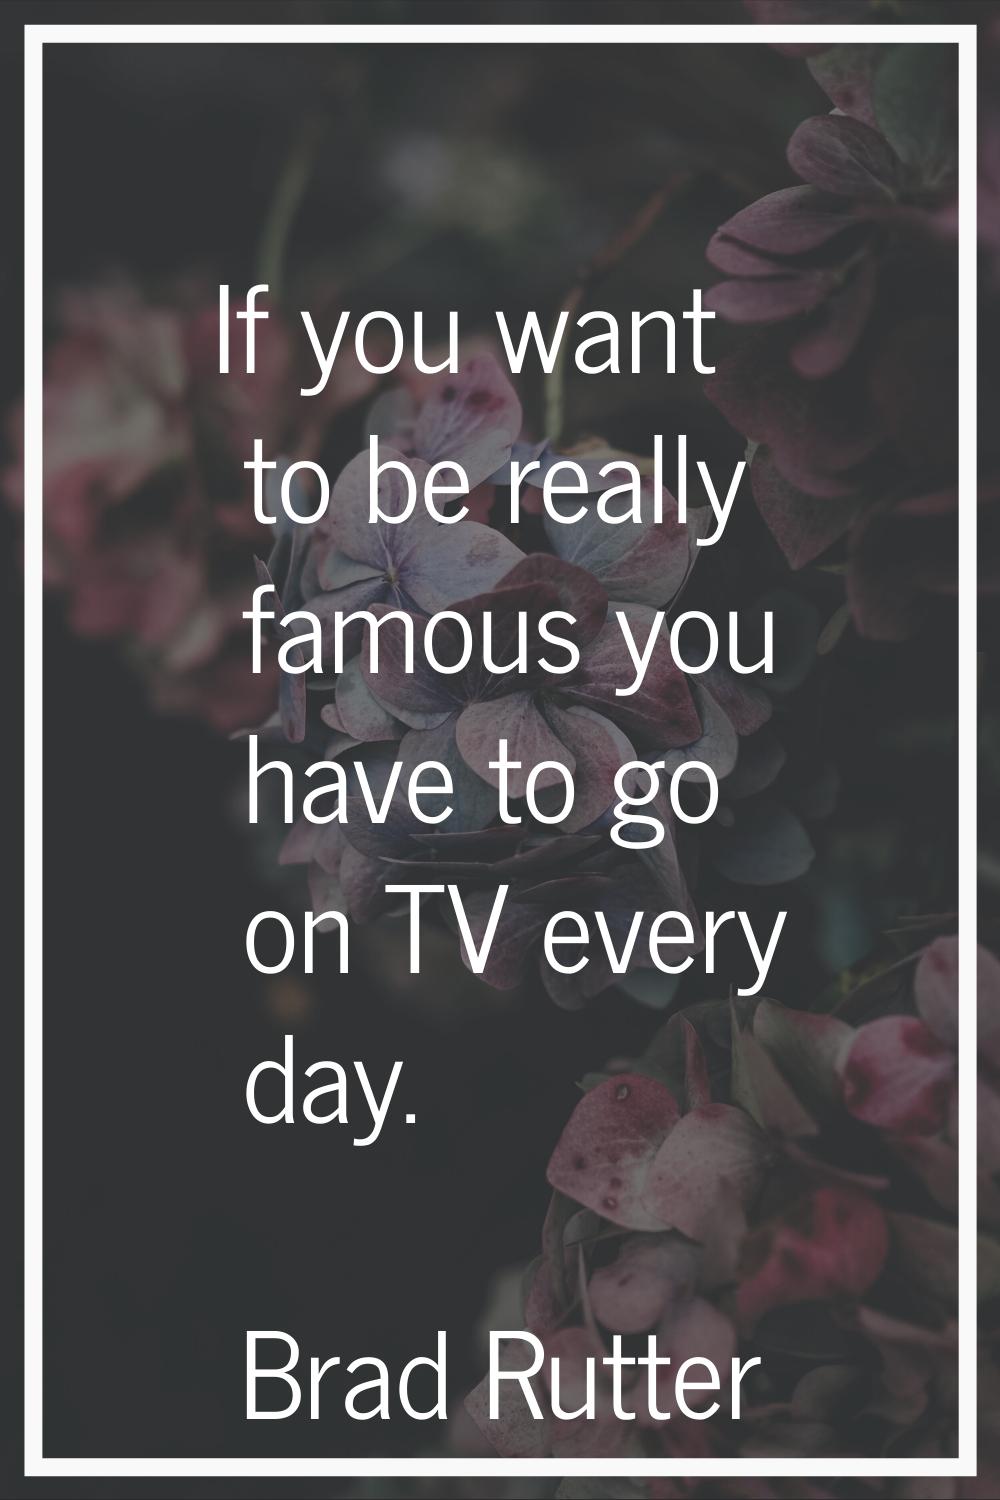 If you want to be really famous you have to go on TV every day.